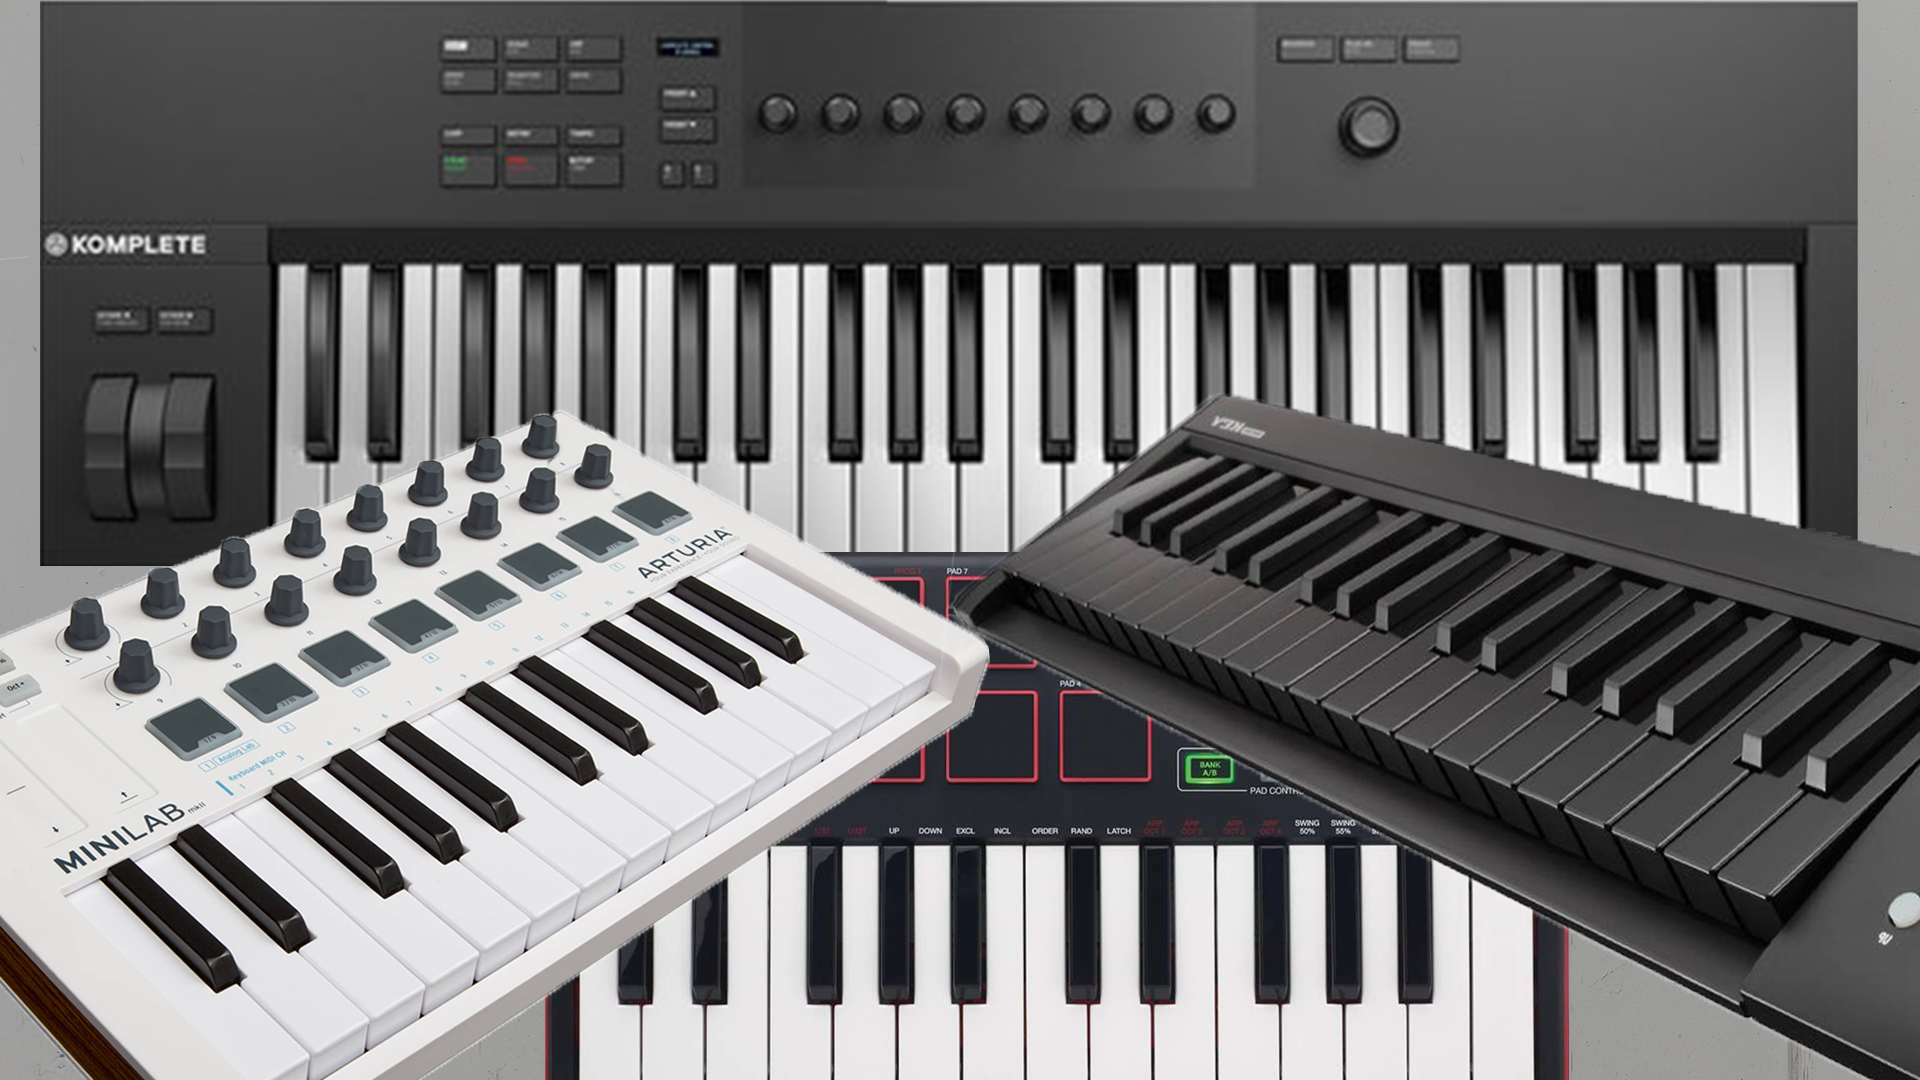 Top 5 affordable MIDI Keyboards for your home studio in 2019